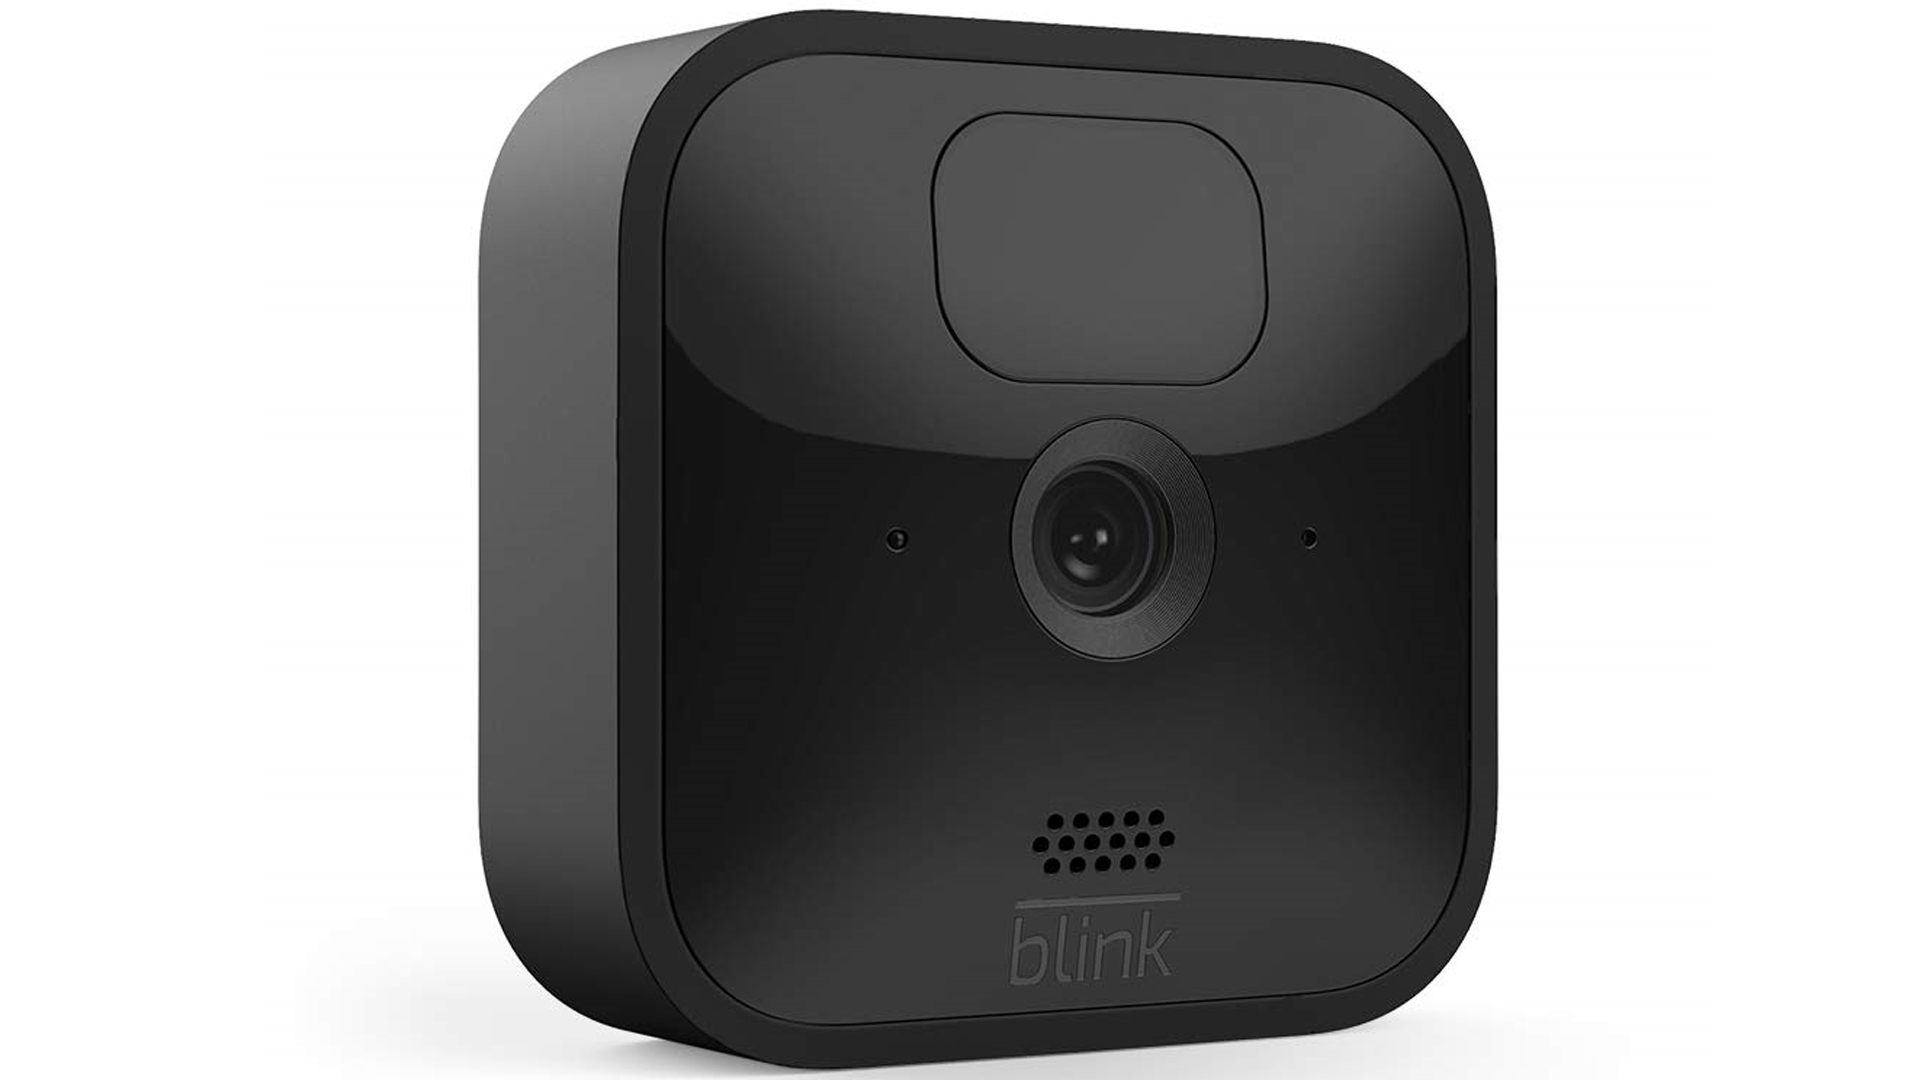 Amazon's Blink outdoor security camera on white background.